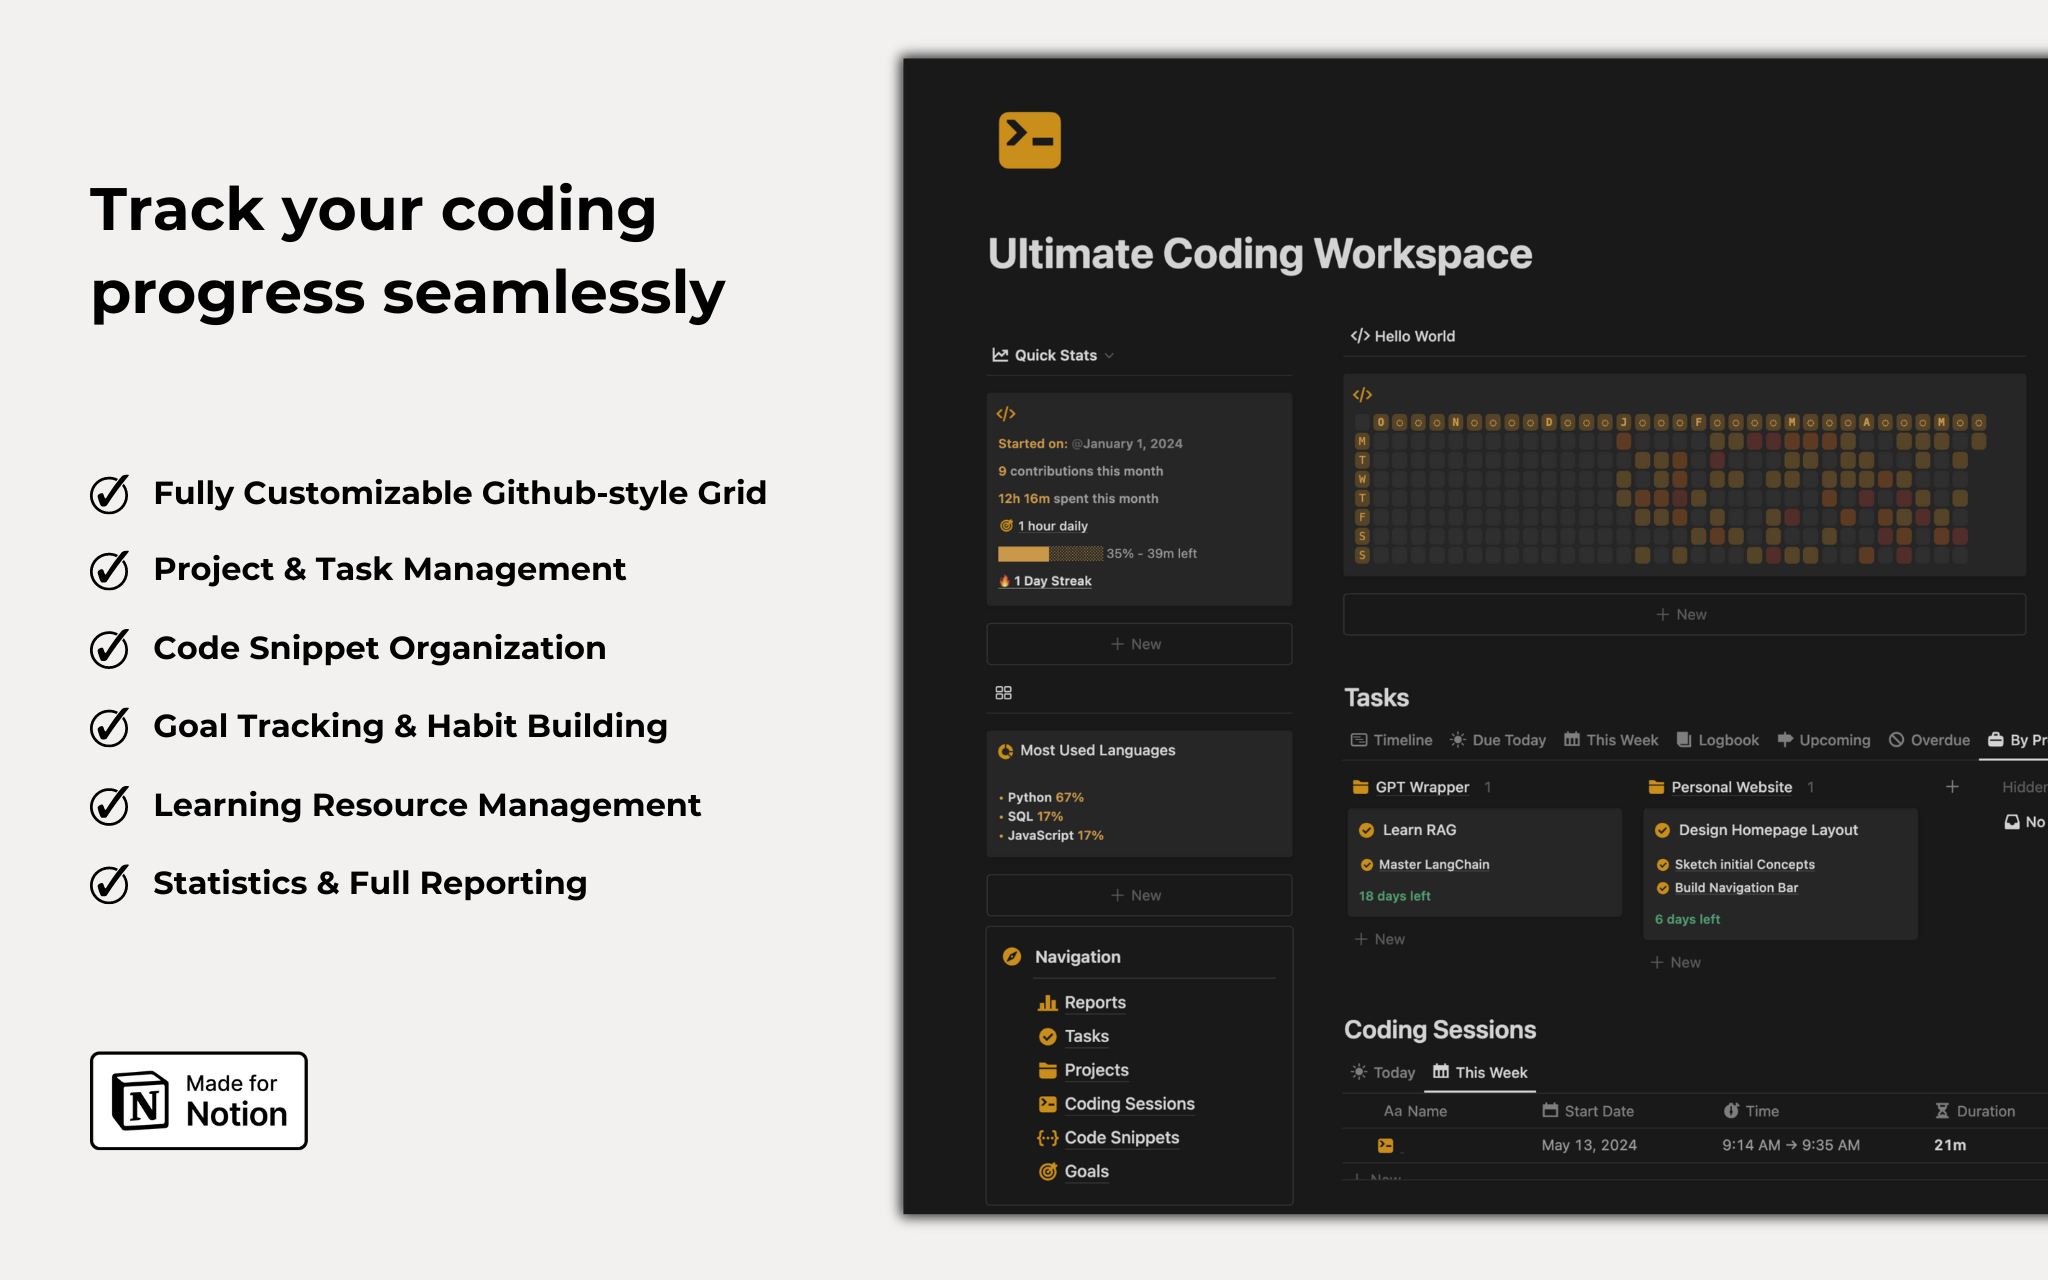 Elevate your coding game to new heights with the Ultimate Notion Workspace - the premier productivity suite optimizing your workflow, insights, and motivation